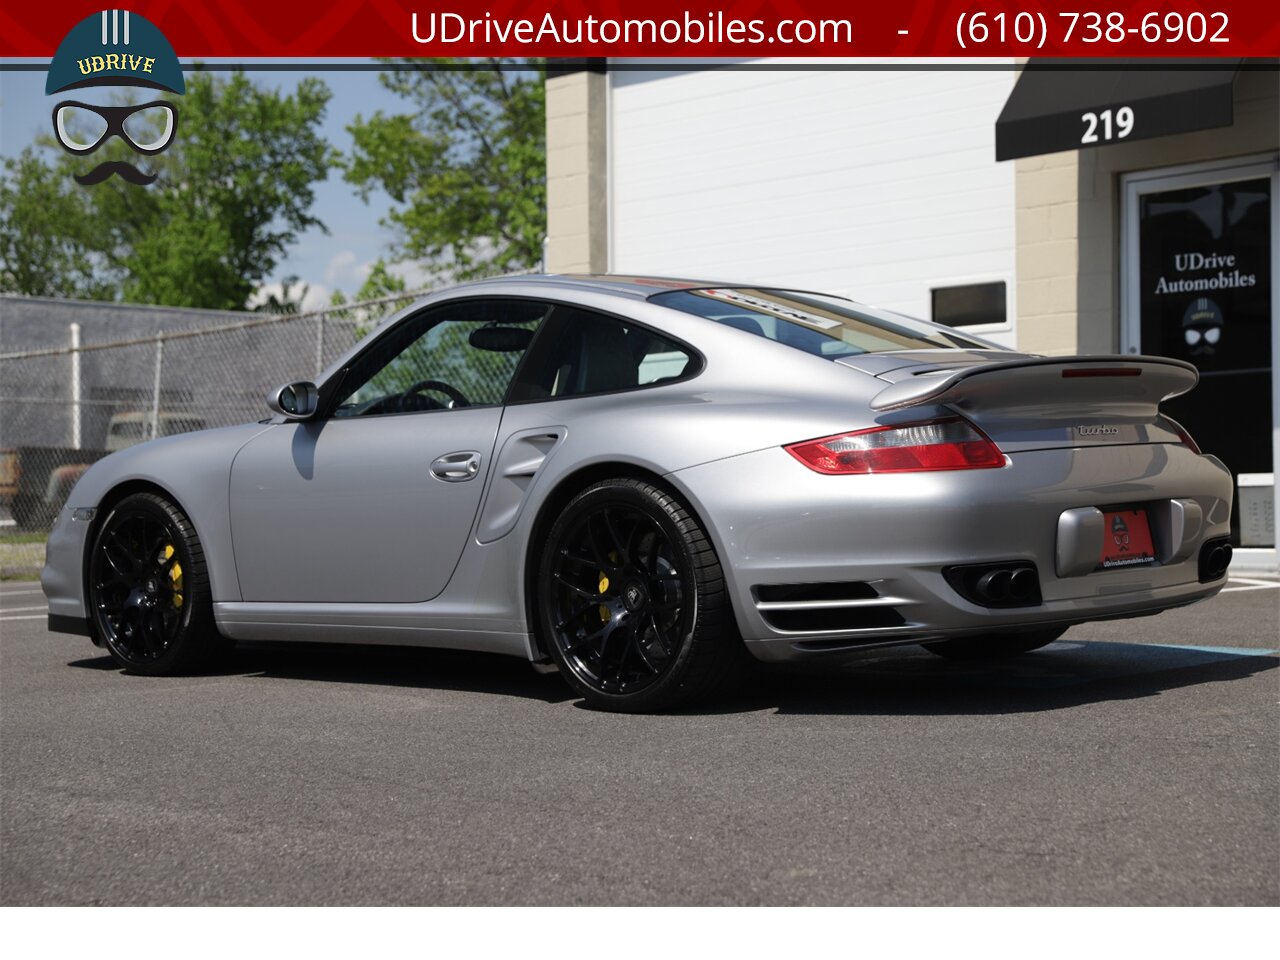 2008 Porsche 911 6 Speed Manual Turbo 997 PCCB's $149k MSRP   - Photo 22 - West Chester, PA 19382